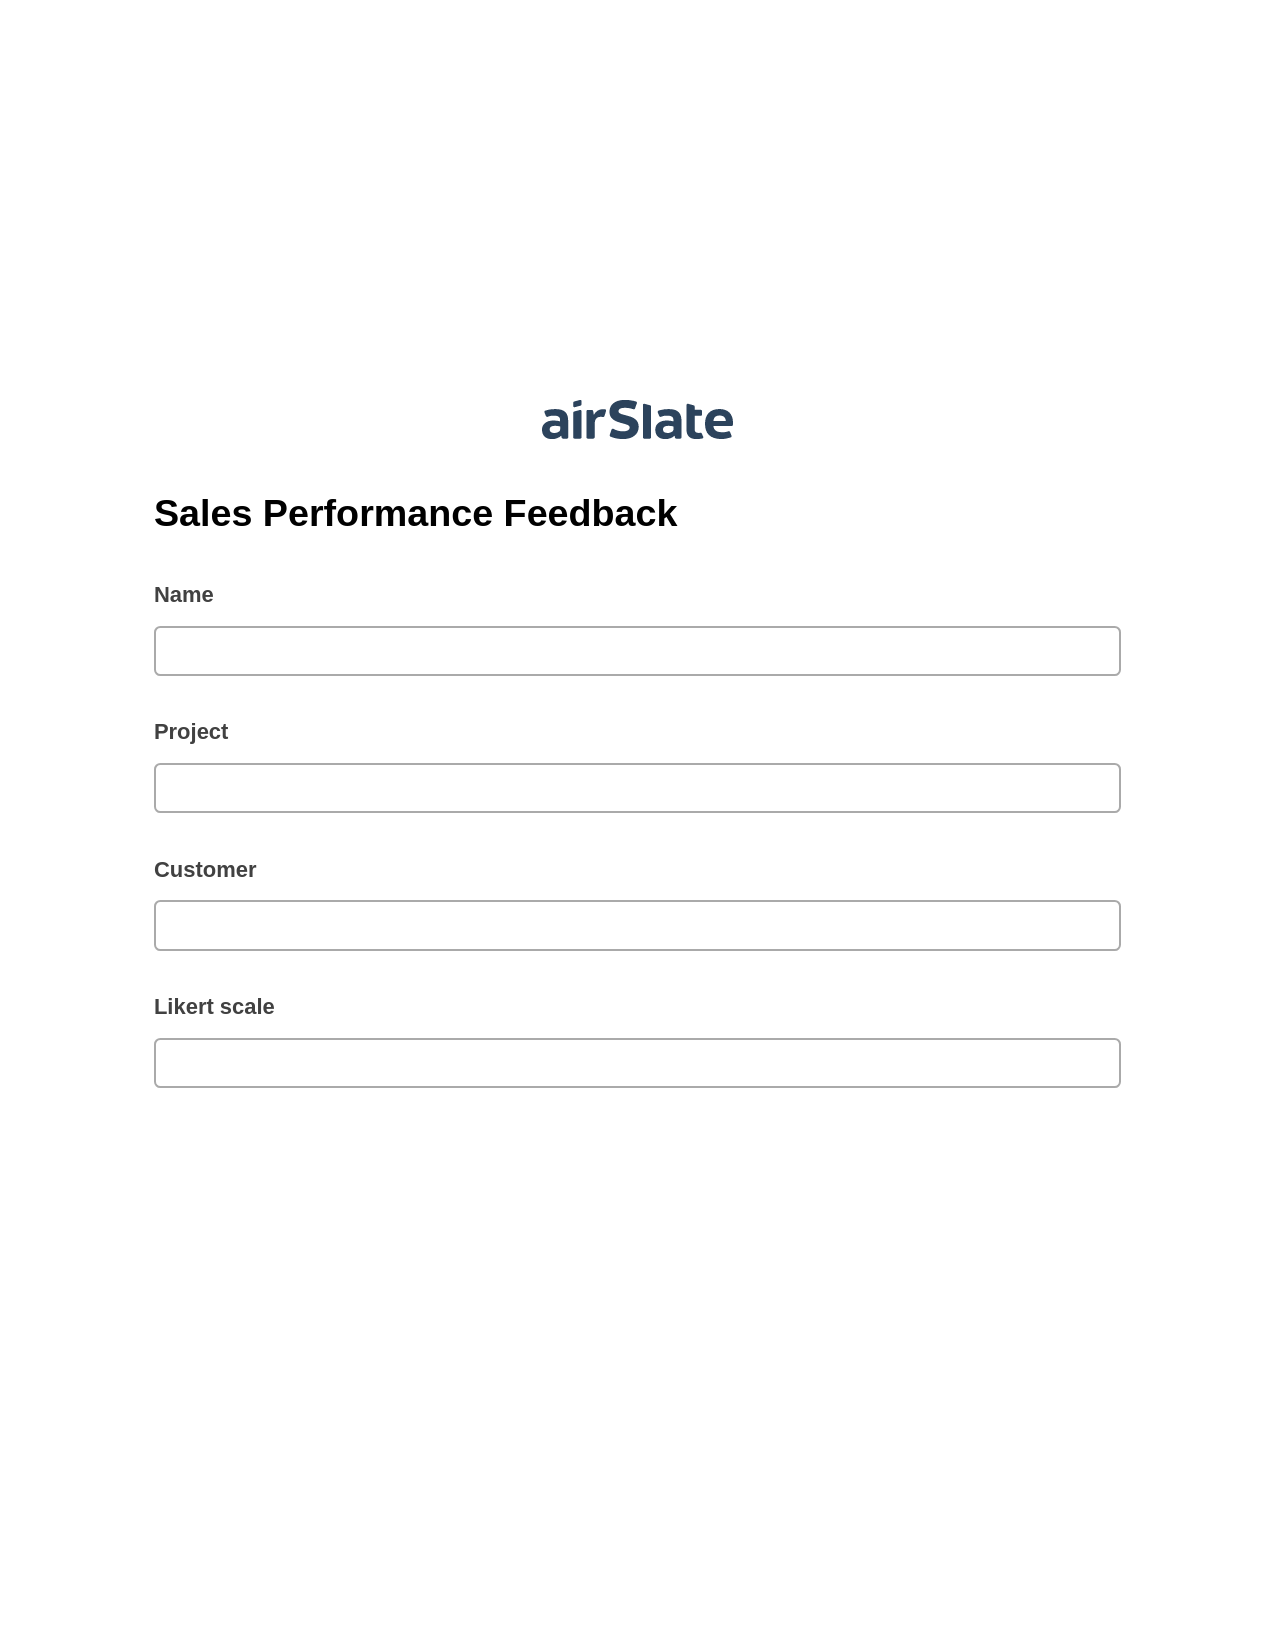 Sales Performance Feedback Pre-fill Slate from MS Dynamics 365 Records Bot, Assign Roles to Recipients Bot, Post-finish Document Bot